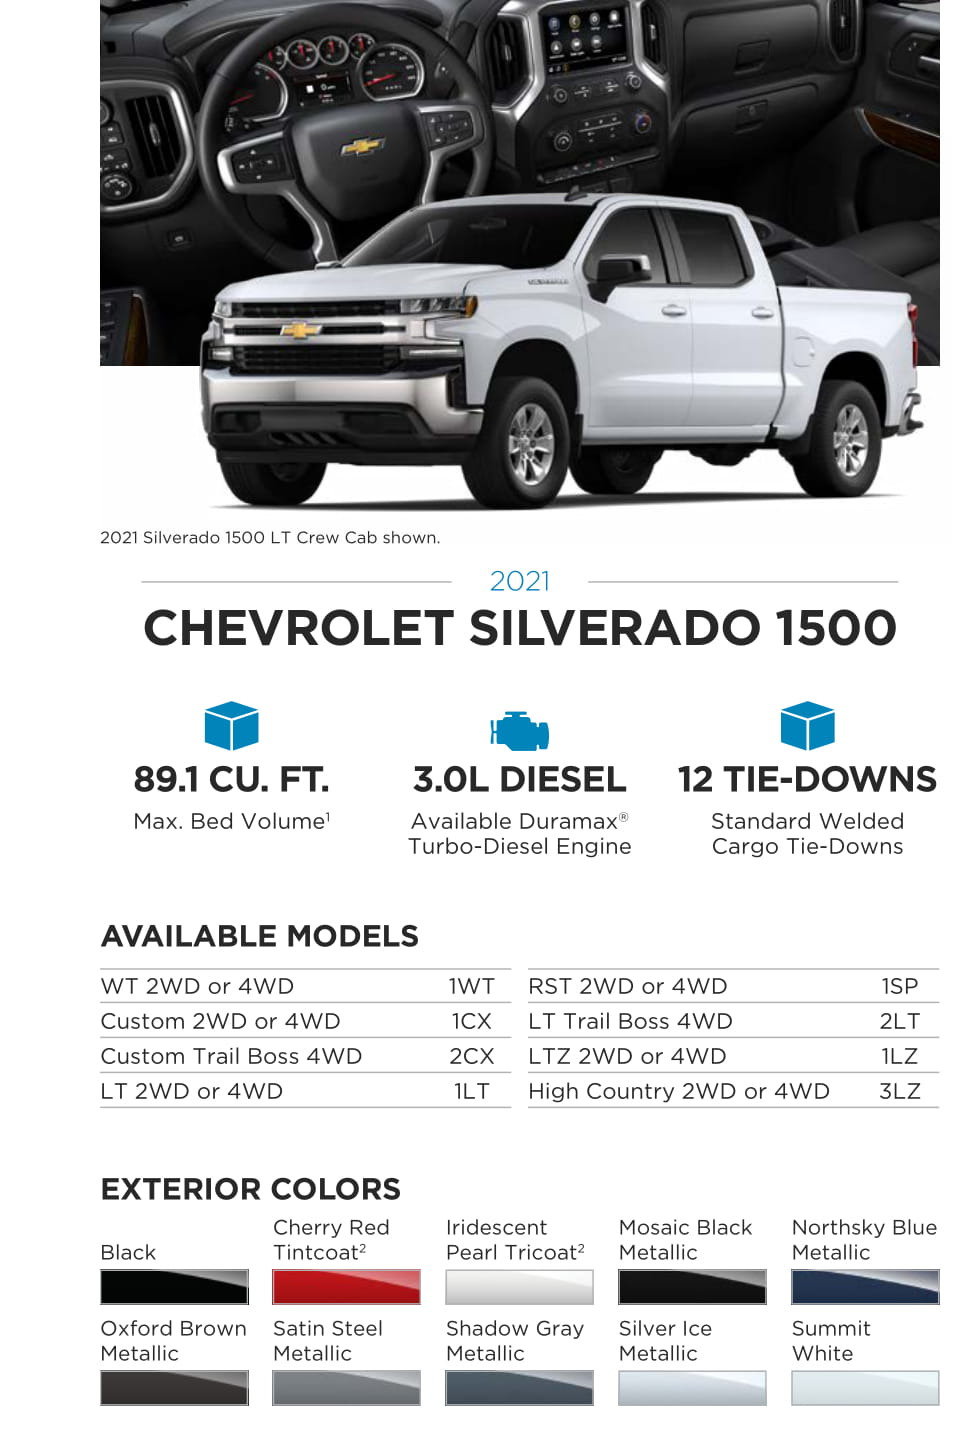 Models and Paint Colors used for this Chevy Vehicle in 2021